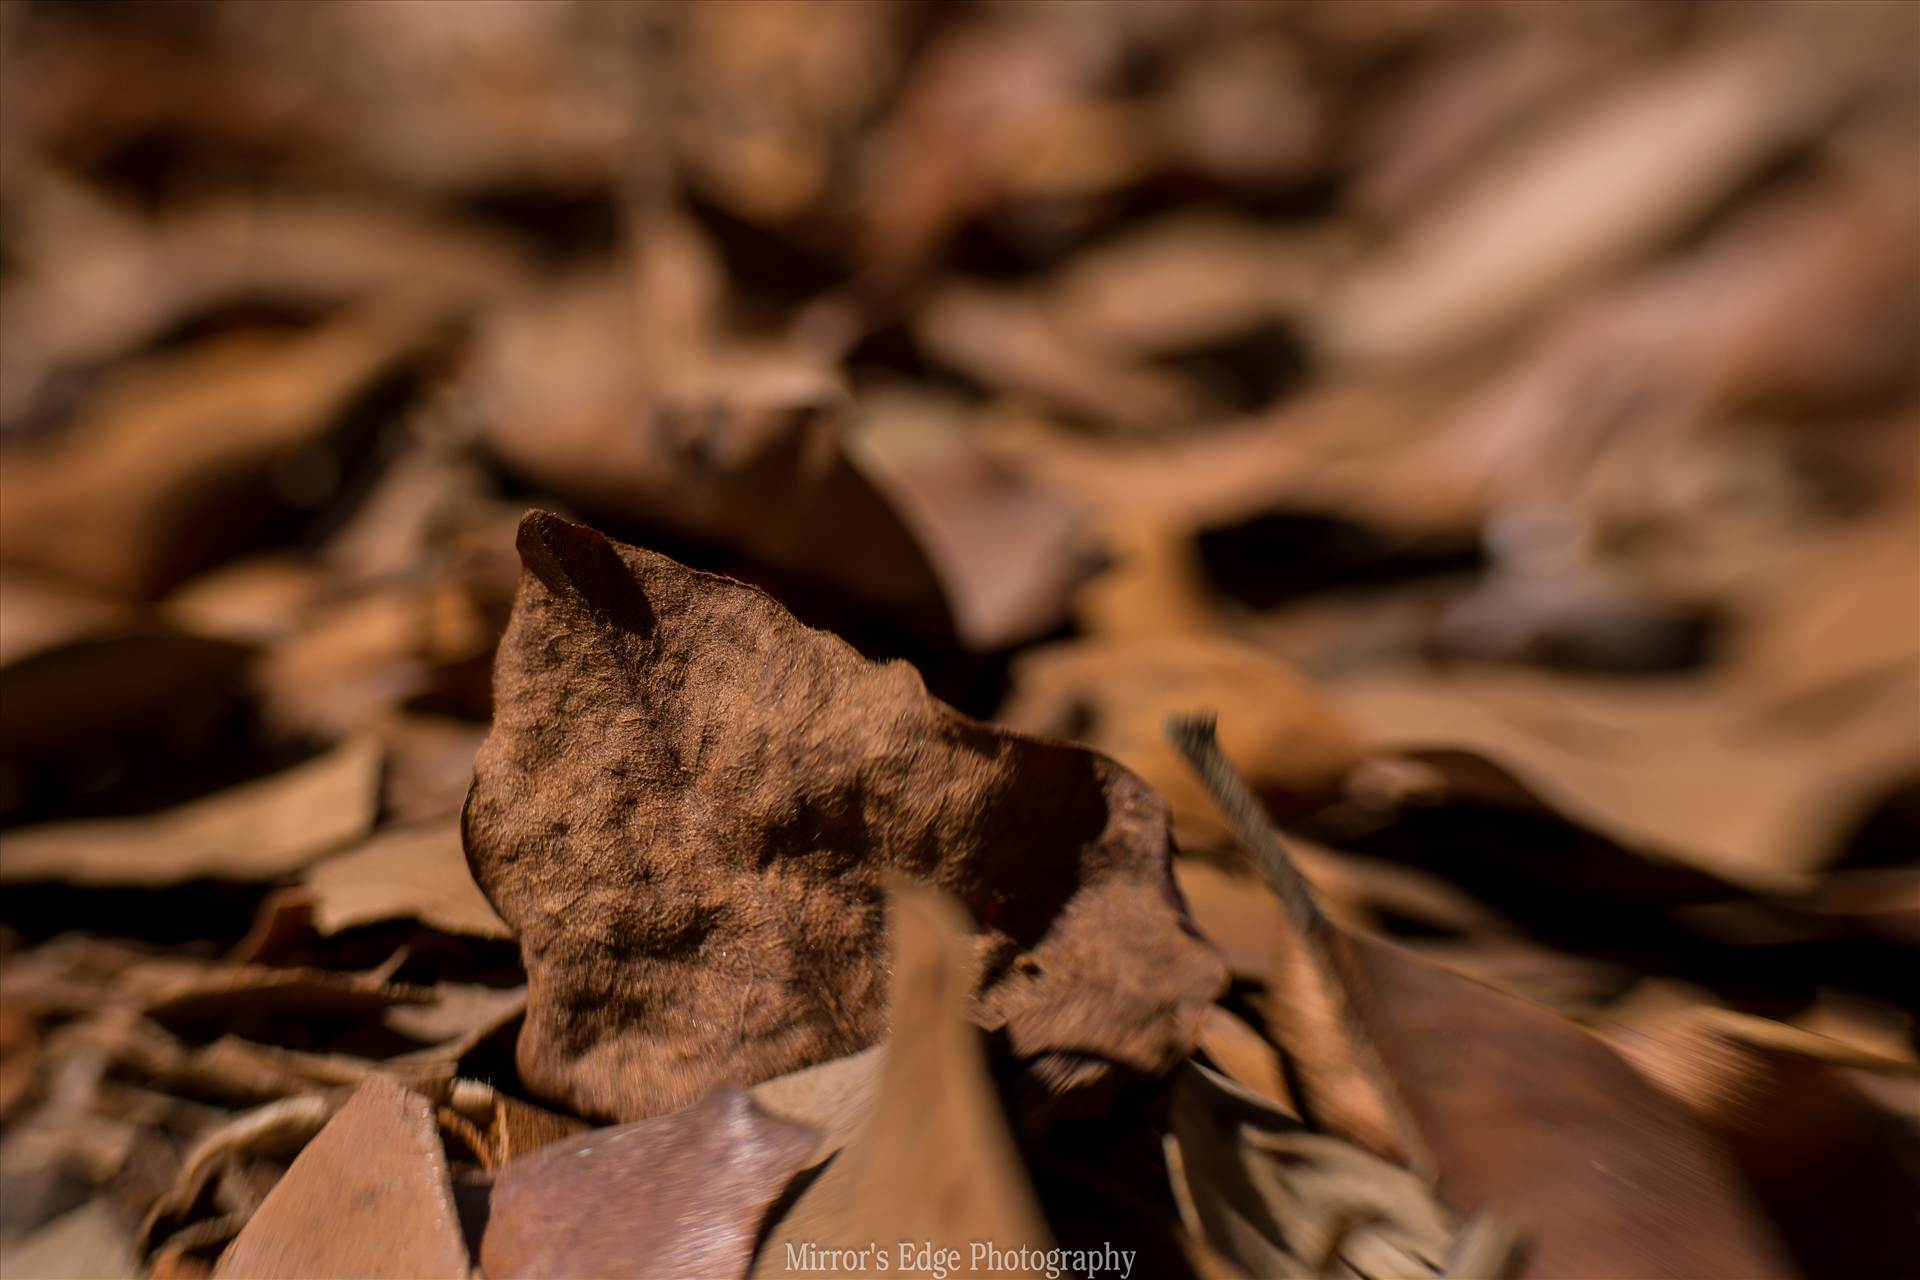 Chocolate Leaves Fallen.jpg - undefined by Sarah Williams